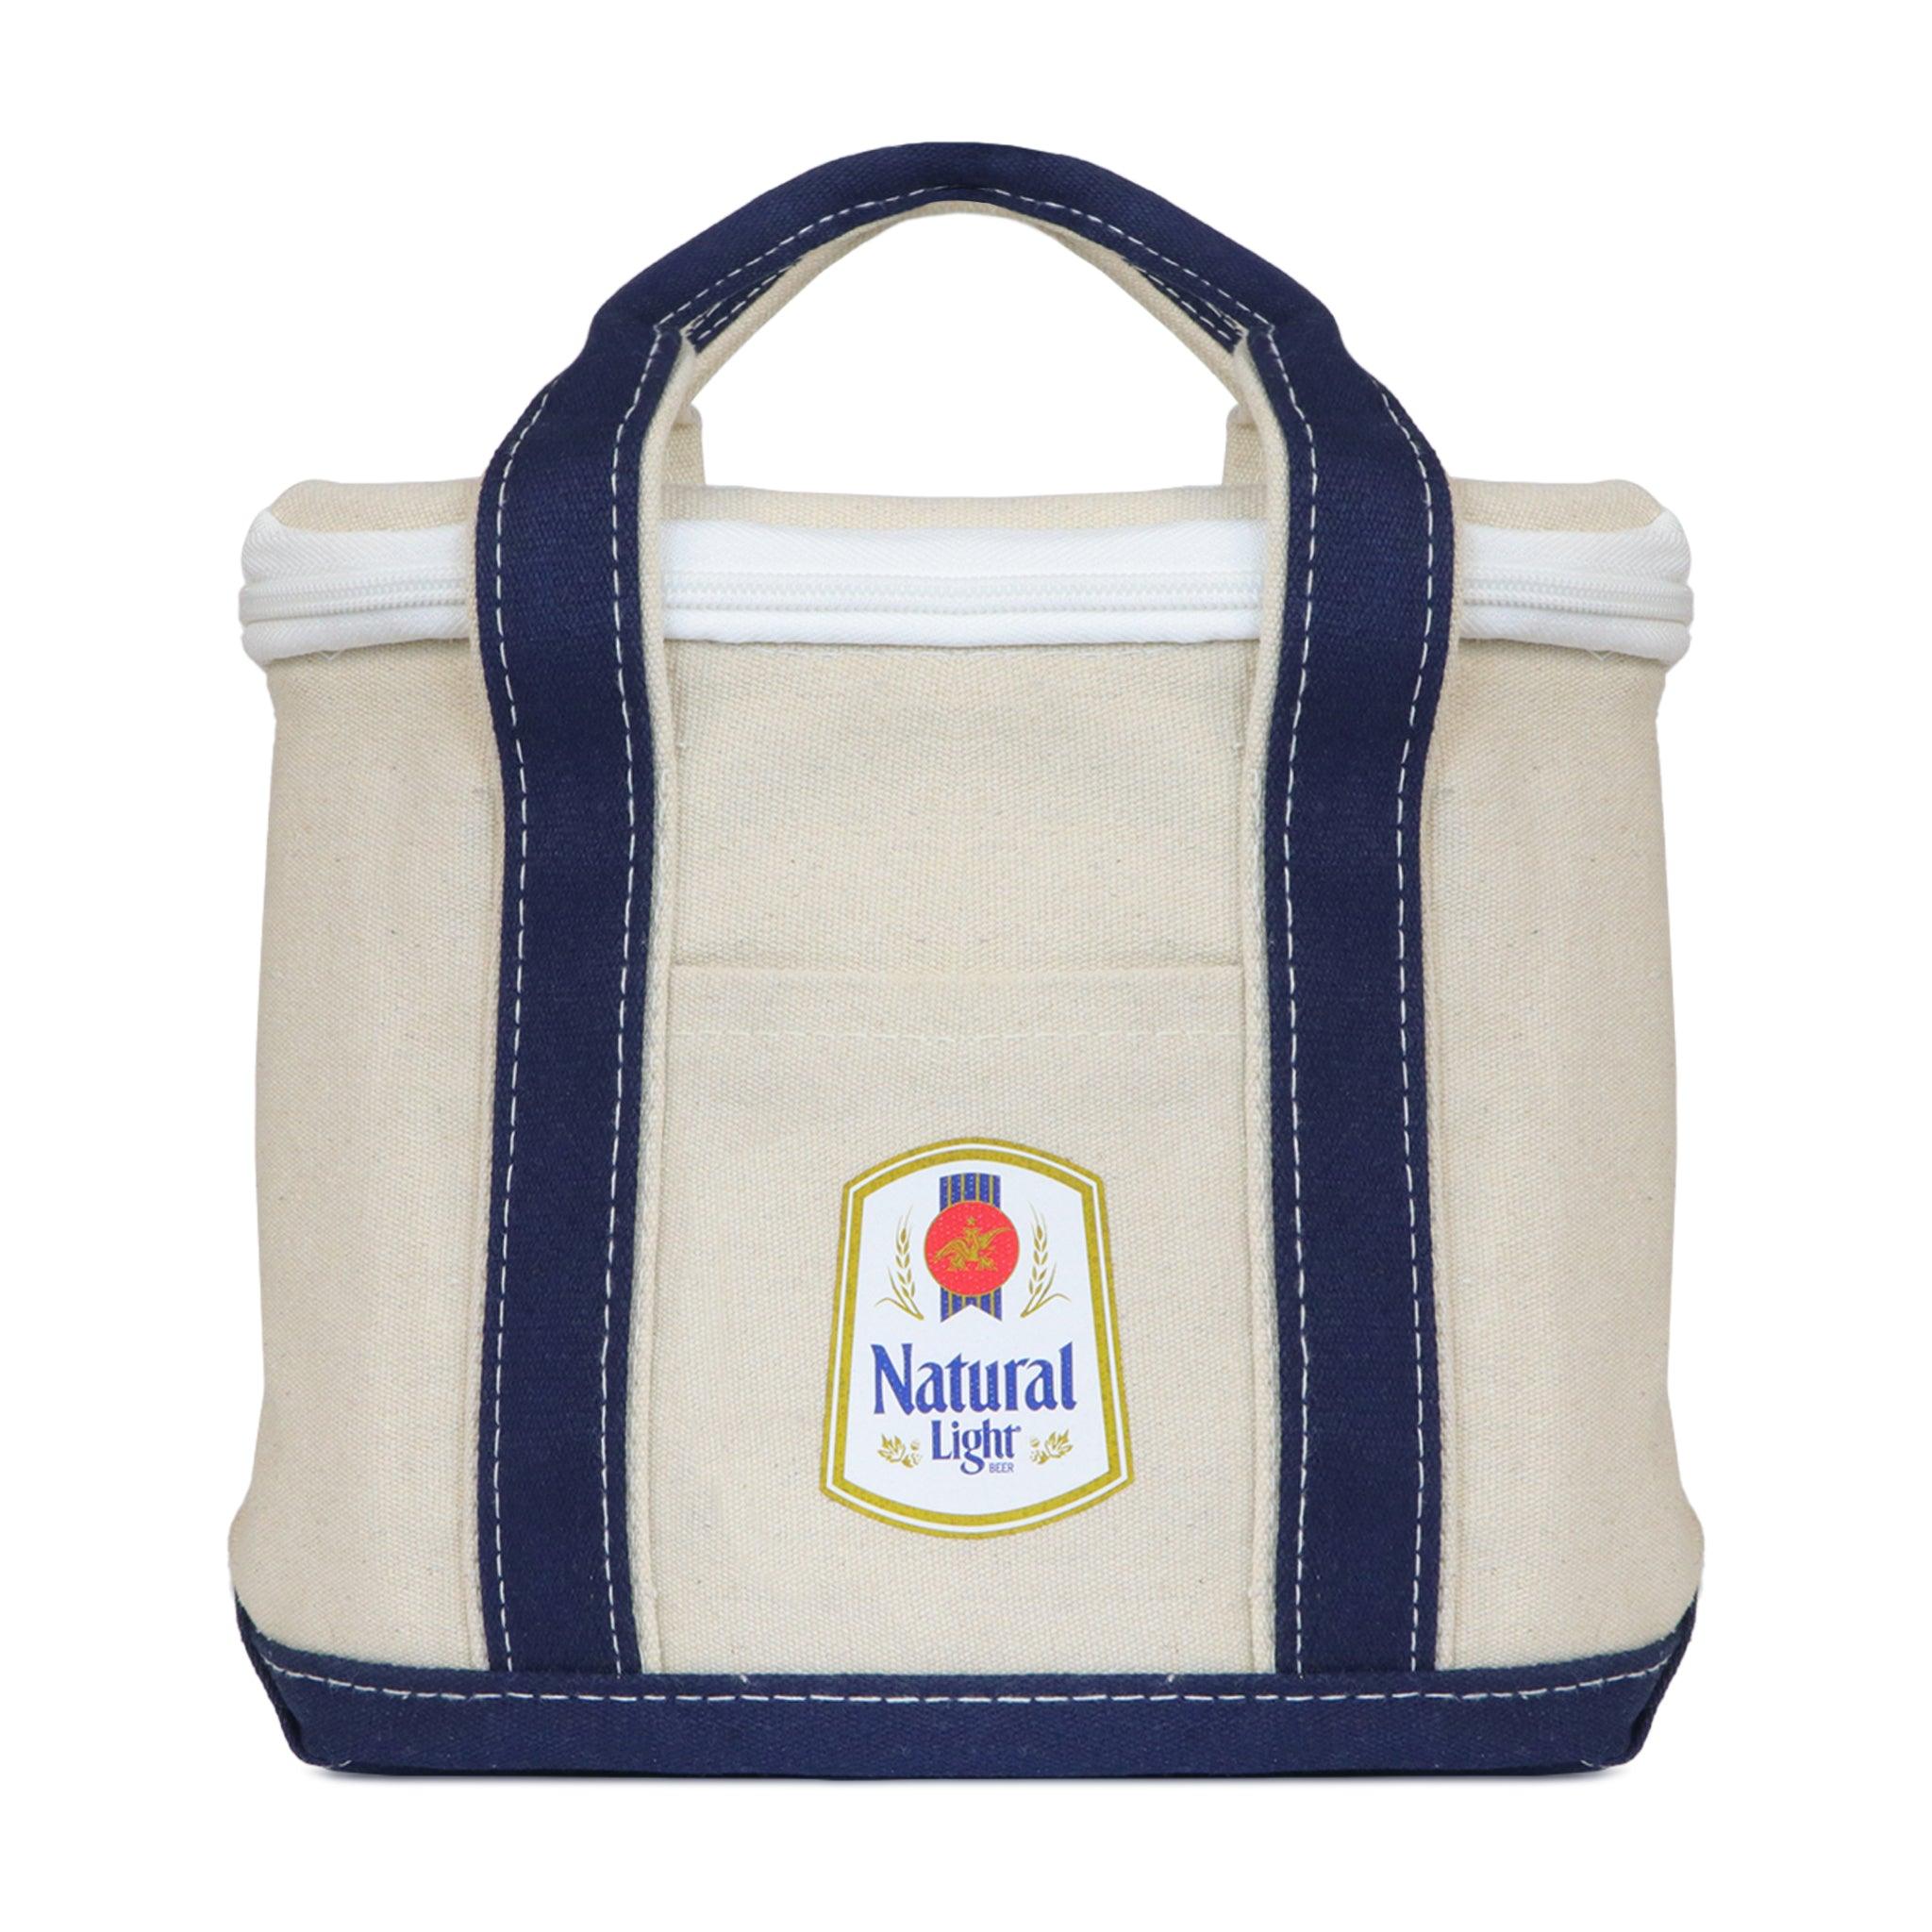 Oatmeal colored canvas 12 can cooler with navy bottom and navy handles with Natural light vintage logo on front pocket. top zipper enclosure